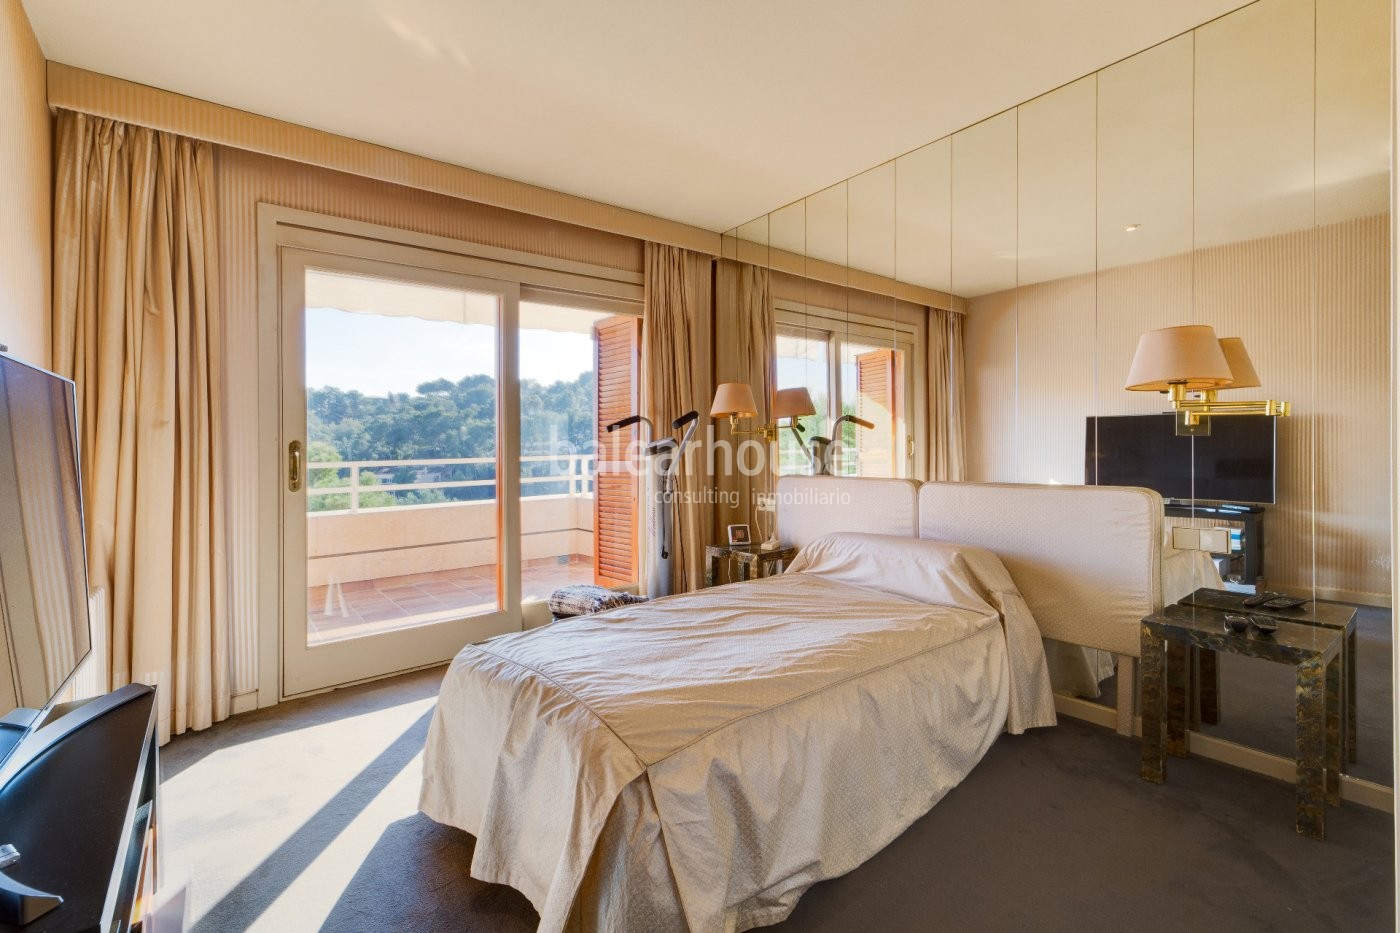 Large light-filled flat with fantastic views of the sea and the green surroundings of Cas Catalá.